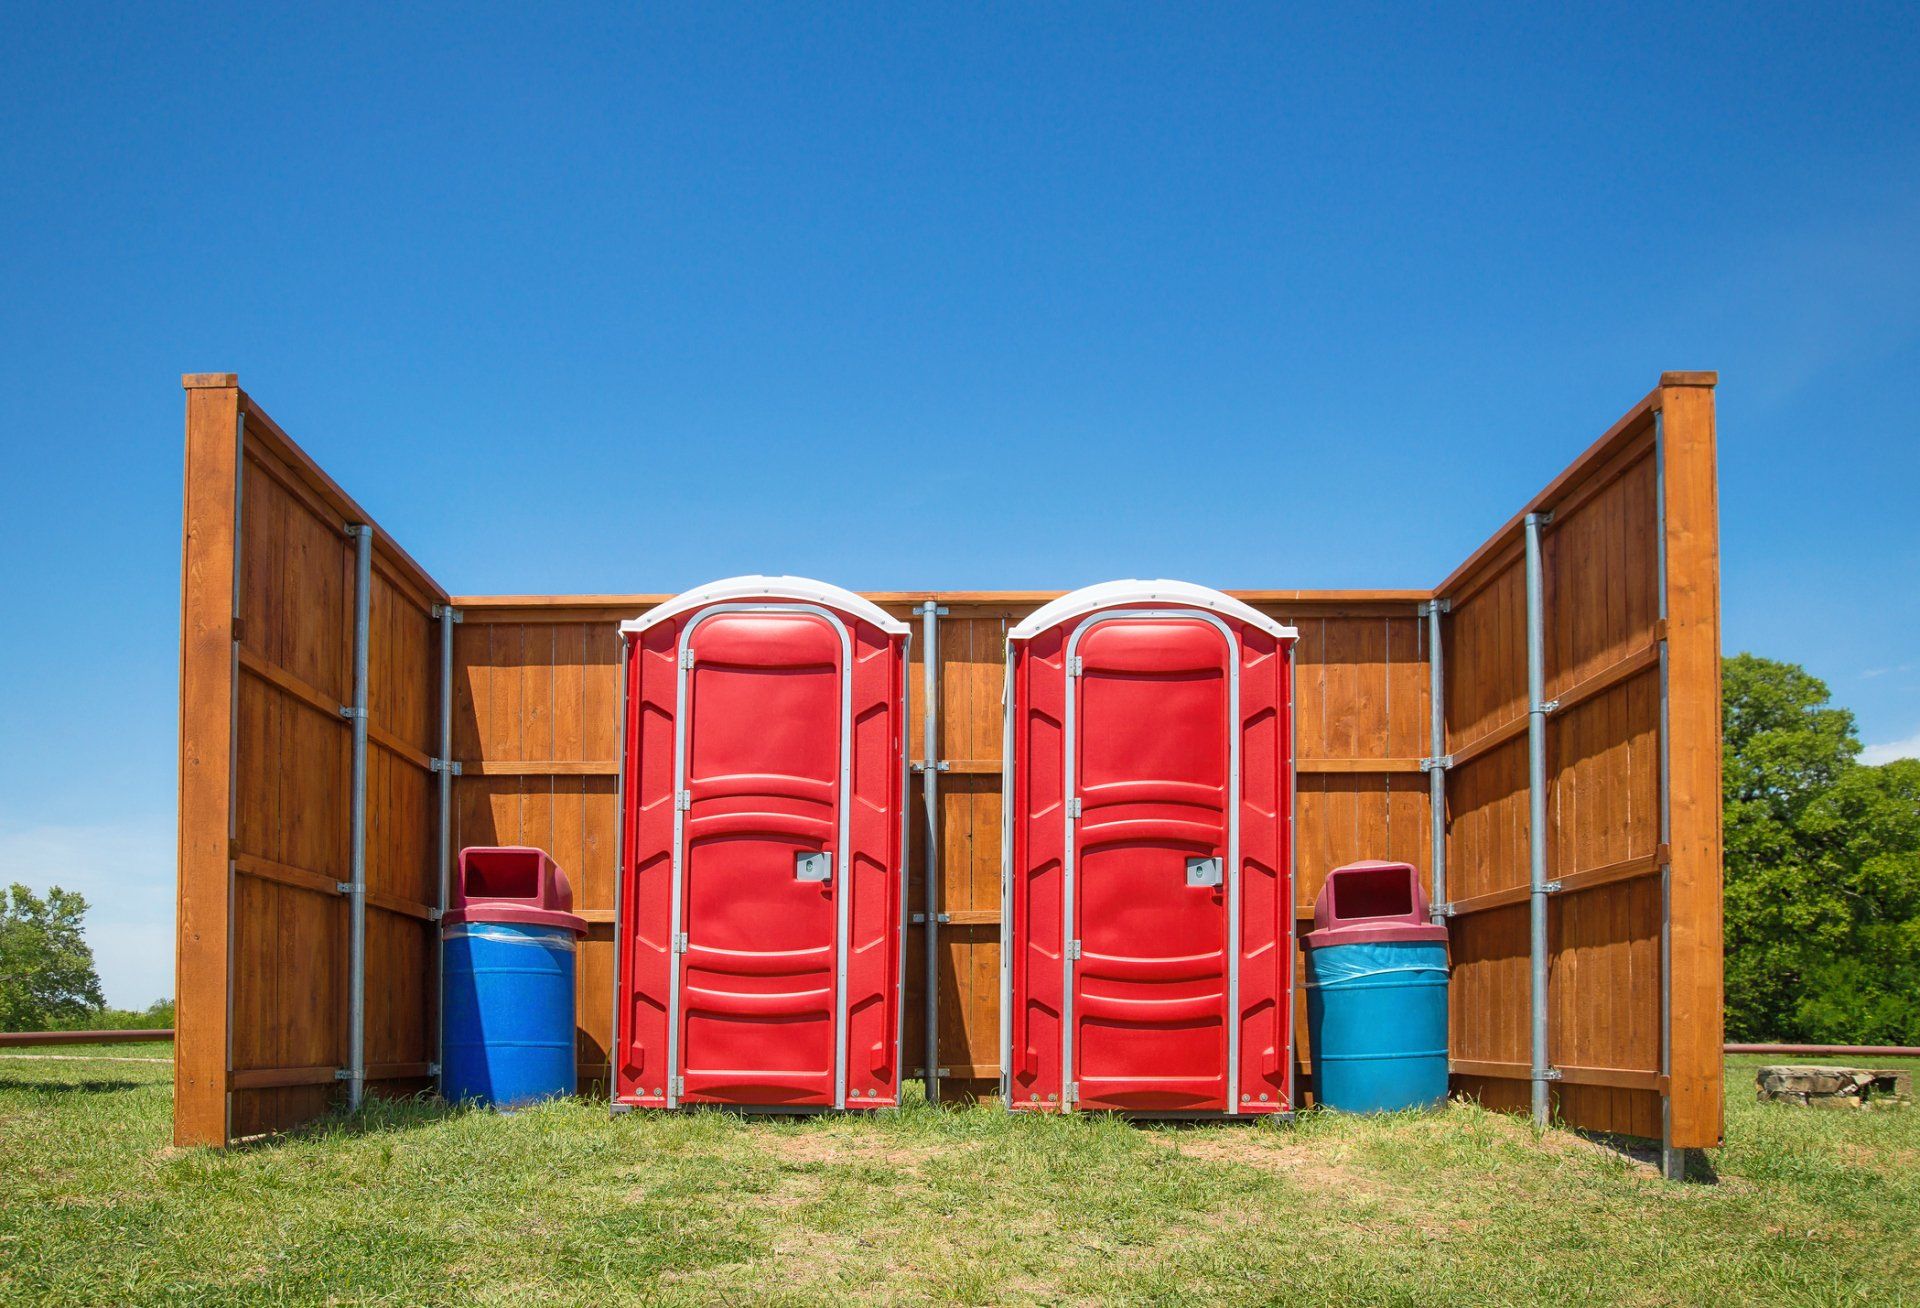 Tow Red Portable Toilet